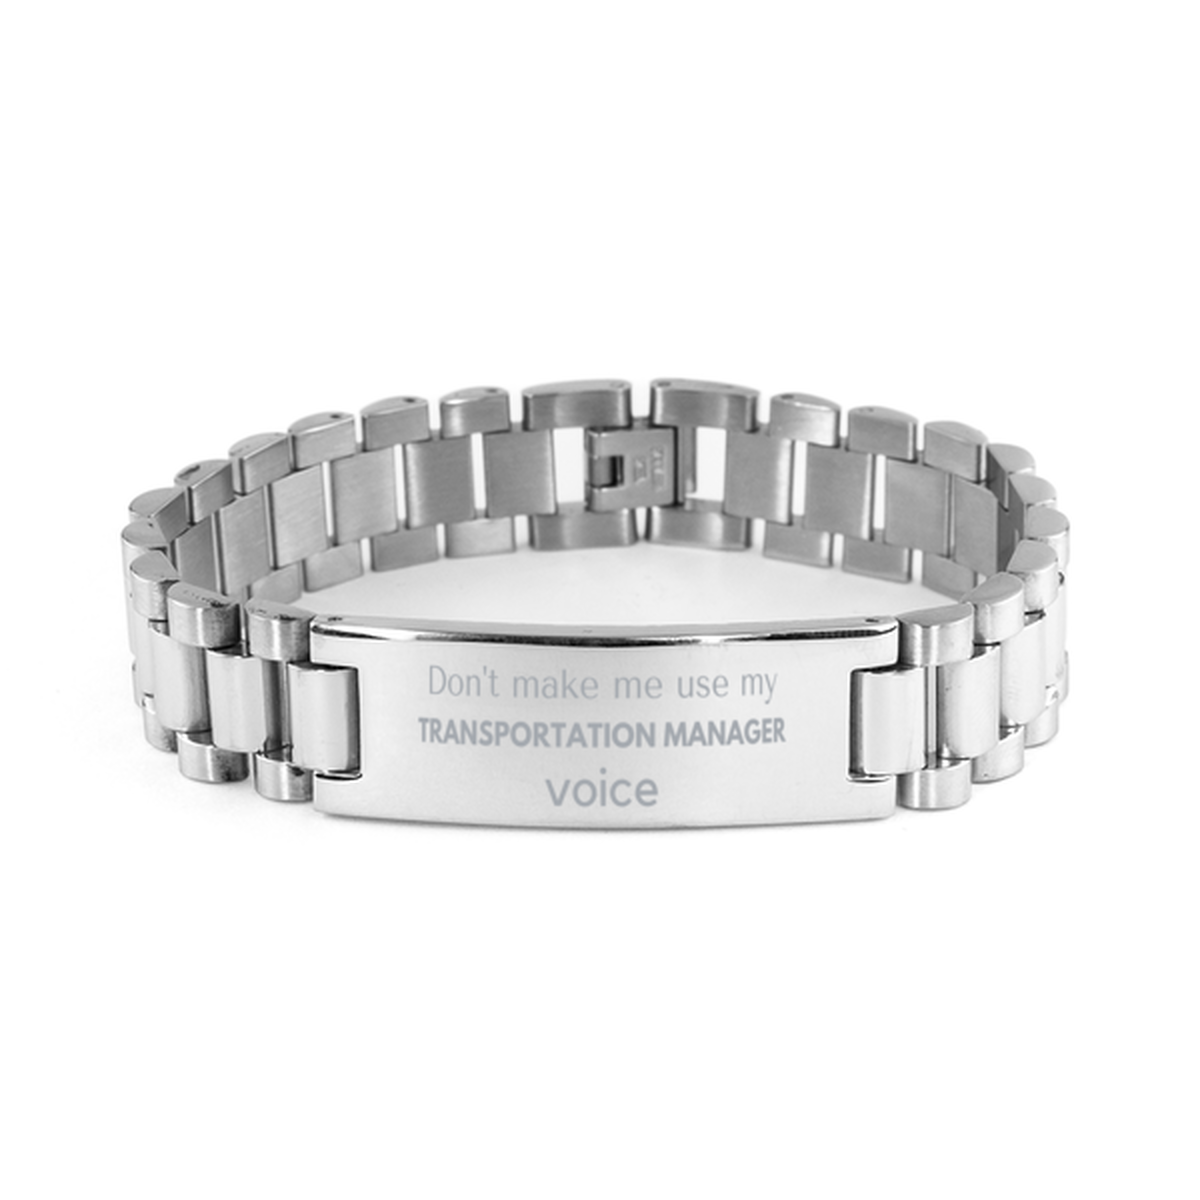 Don't make me use my Transportation Manager voice, Sarcasm Transportation Manager Gifts, Christmas Transportation Manager Ladder Stainless Steel Bracelet Birthday Unique Gifts For Transportation Manager Coworkers, Men, Women, Colleague, Friends